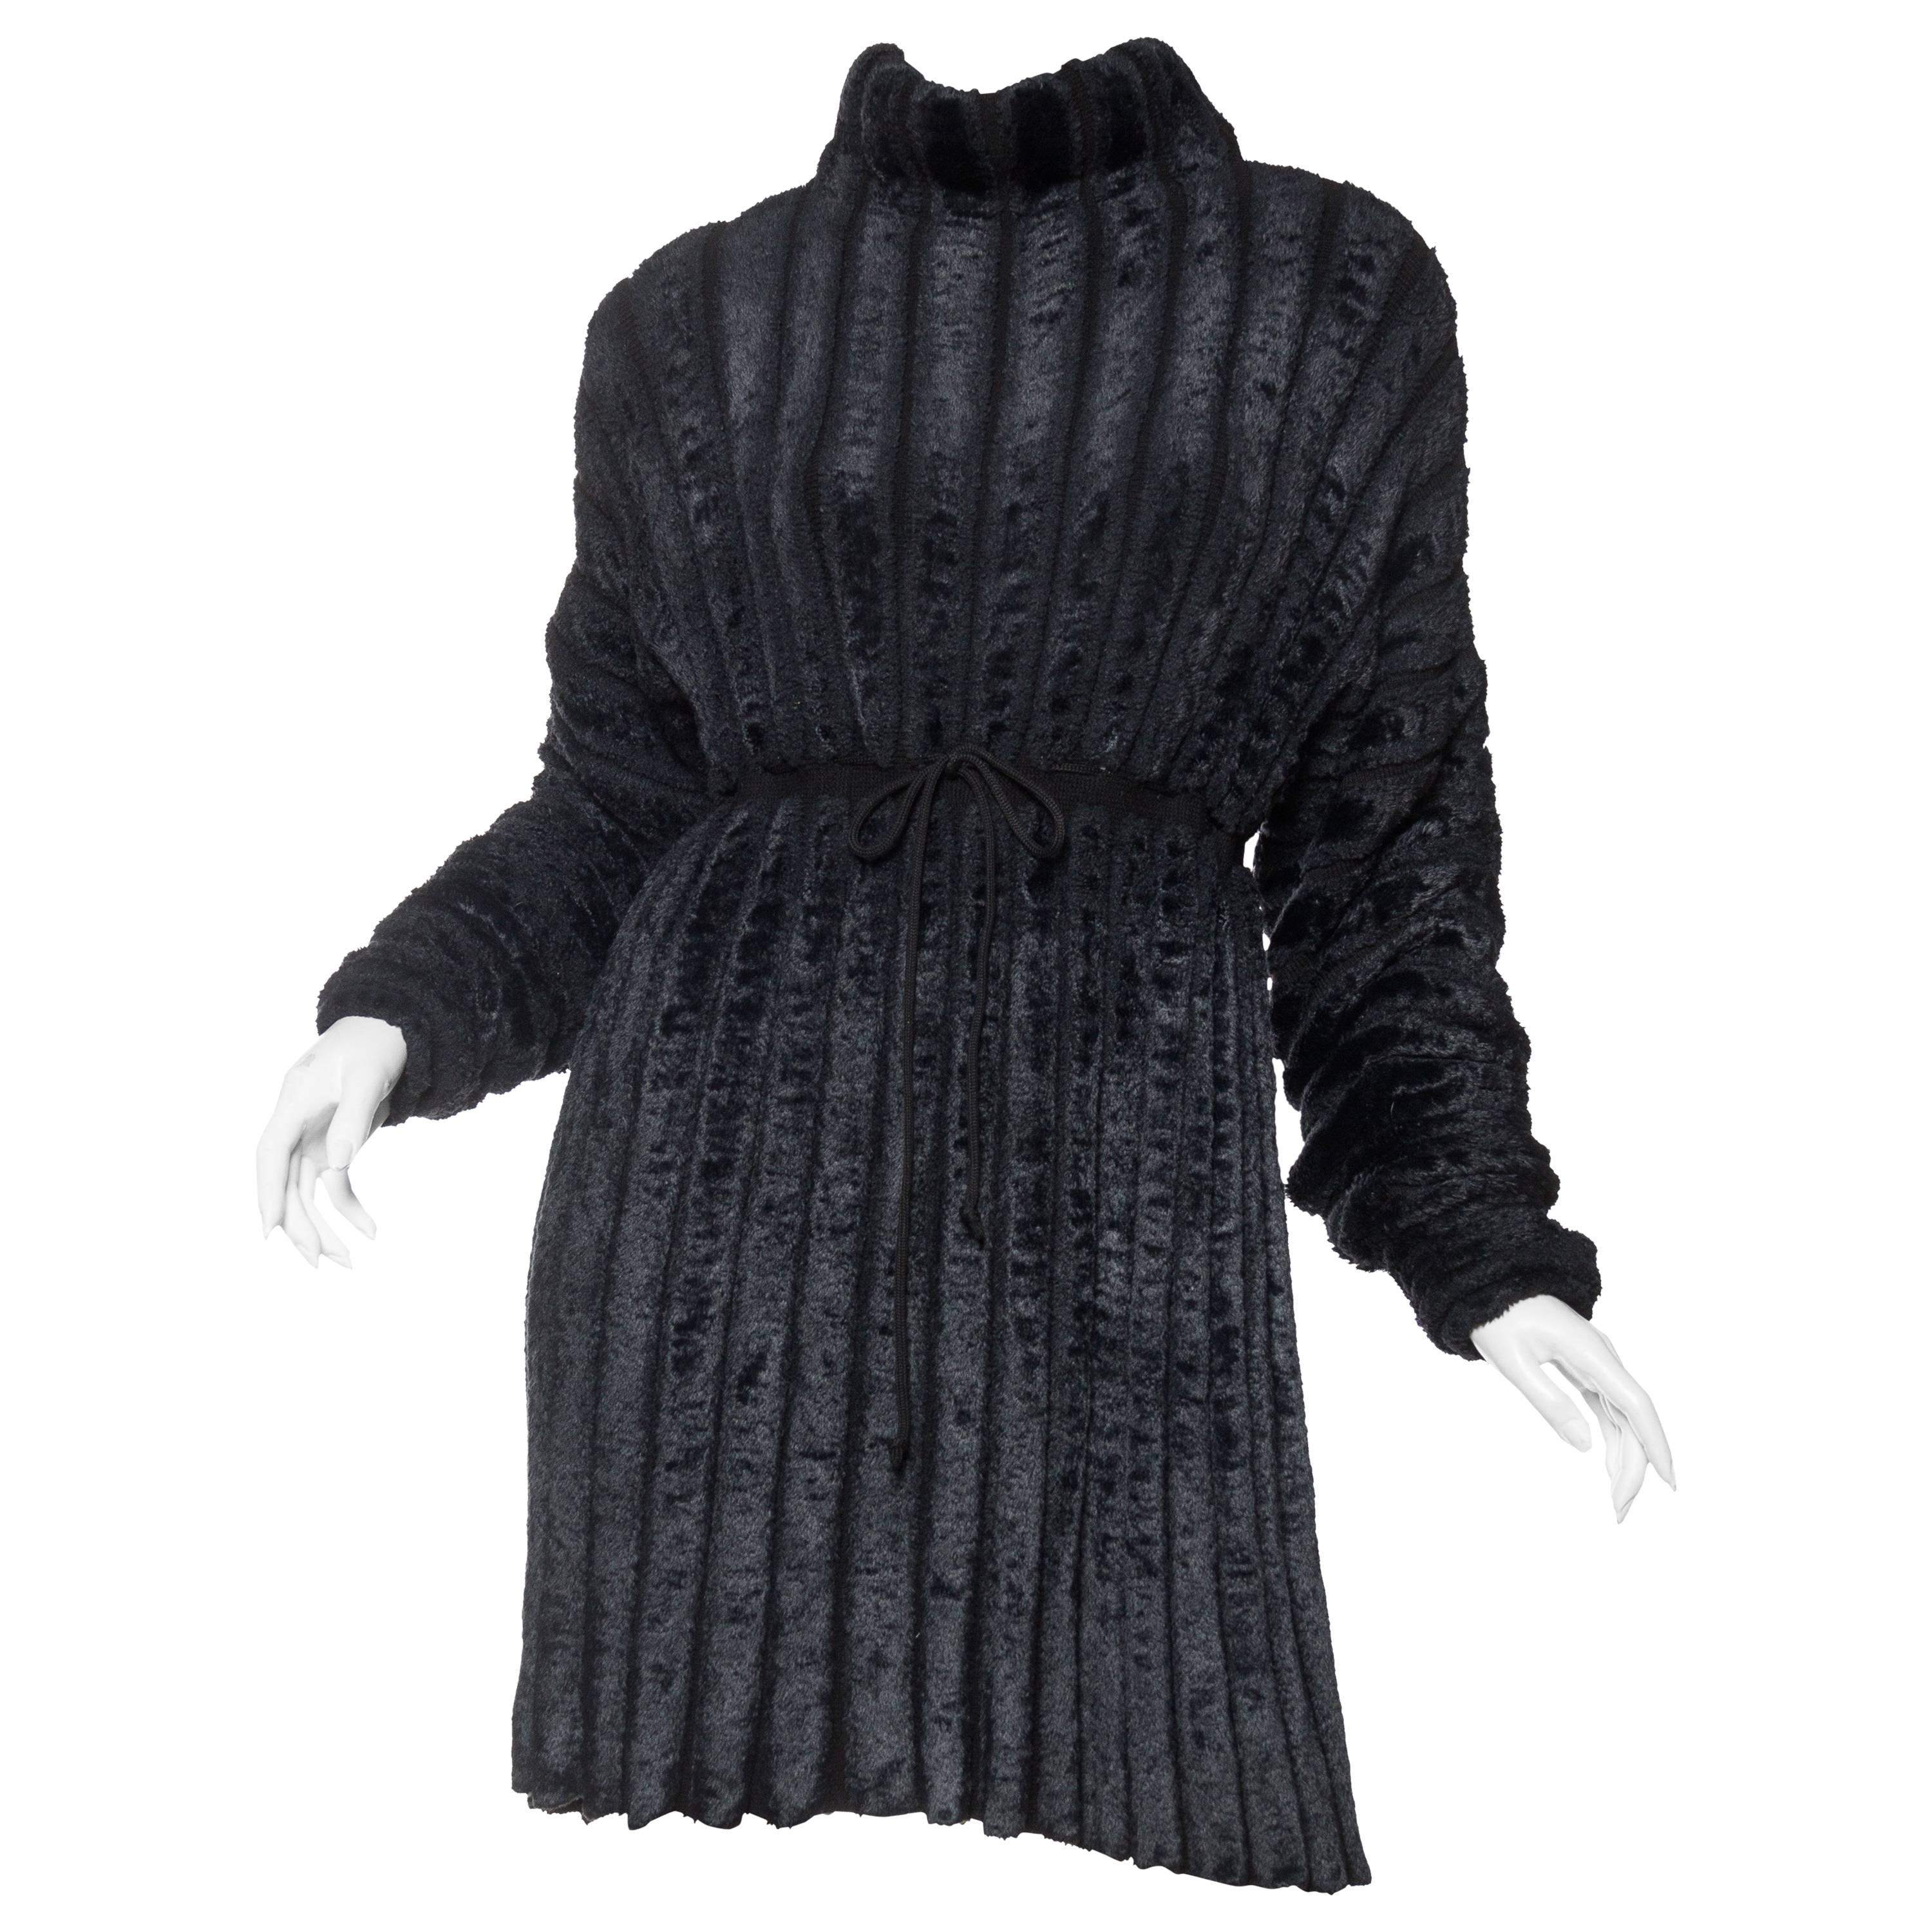 Alaia Iconic Oversized Chenille Dress, Fall 1988 Collection